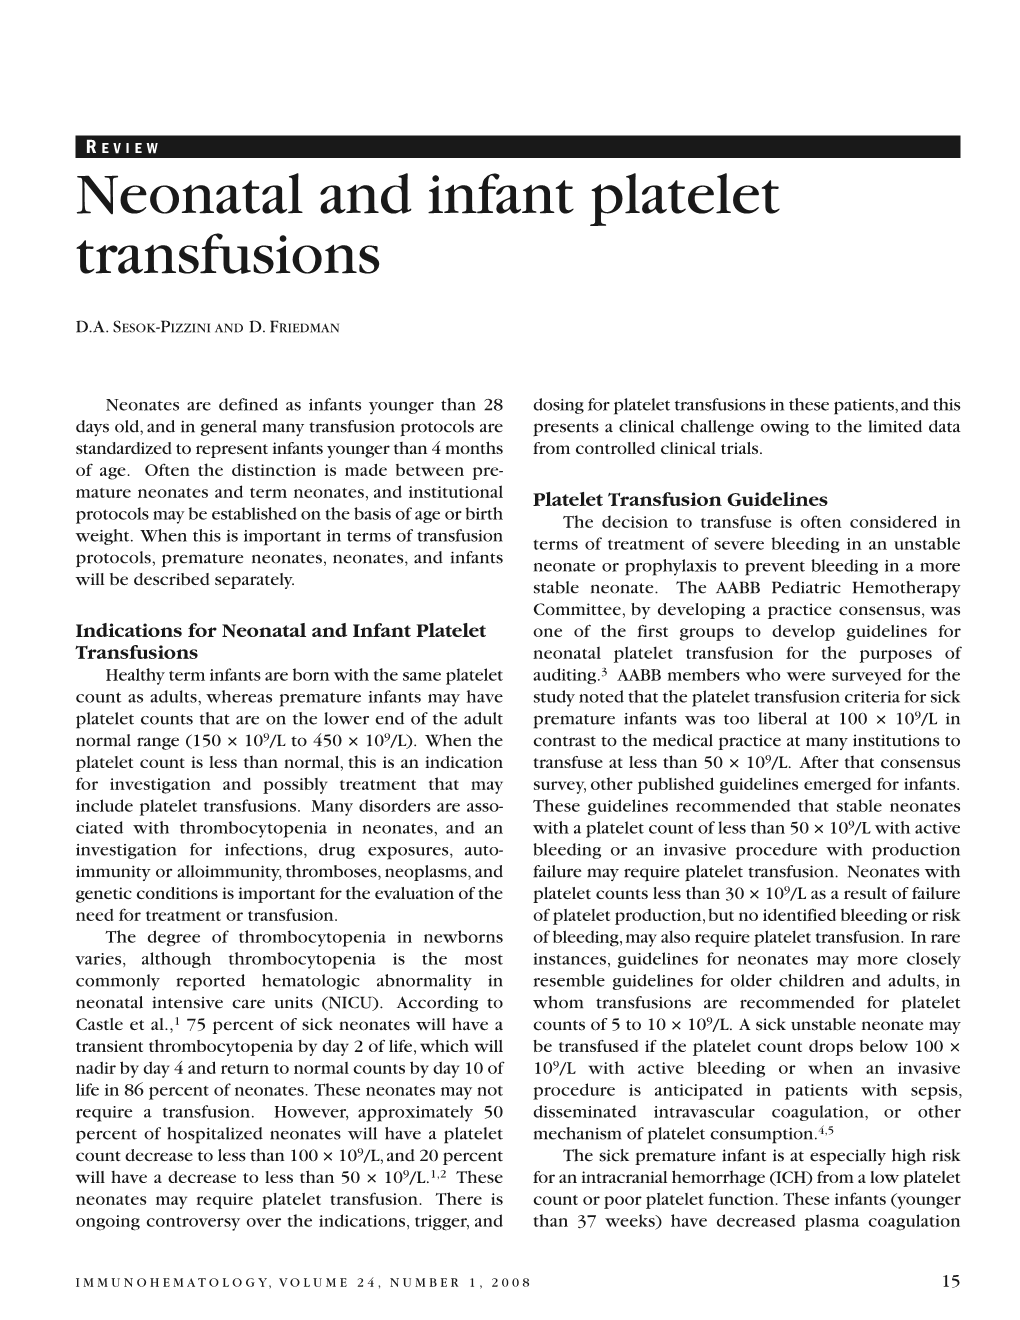 Neonatal and Infant Platelet Transfusions